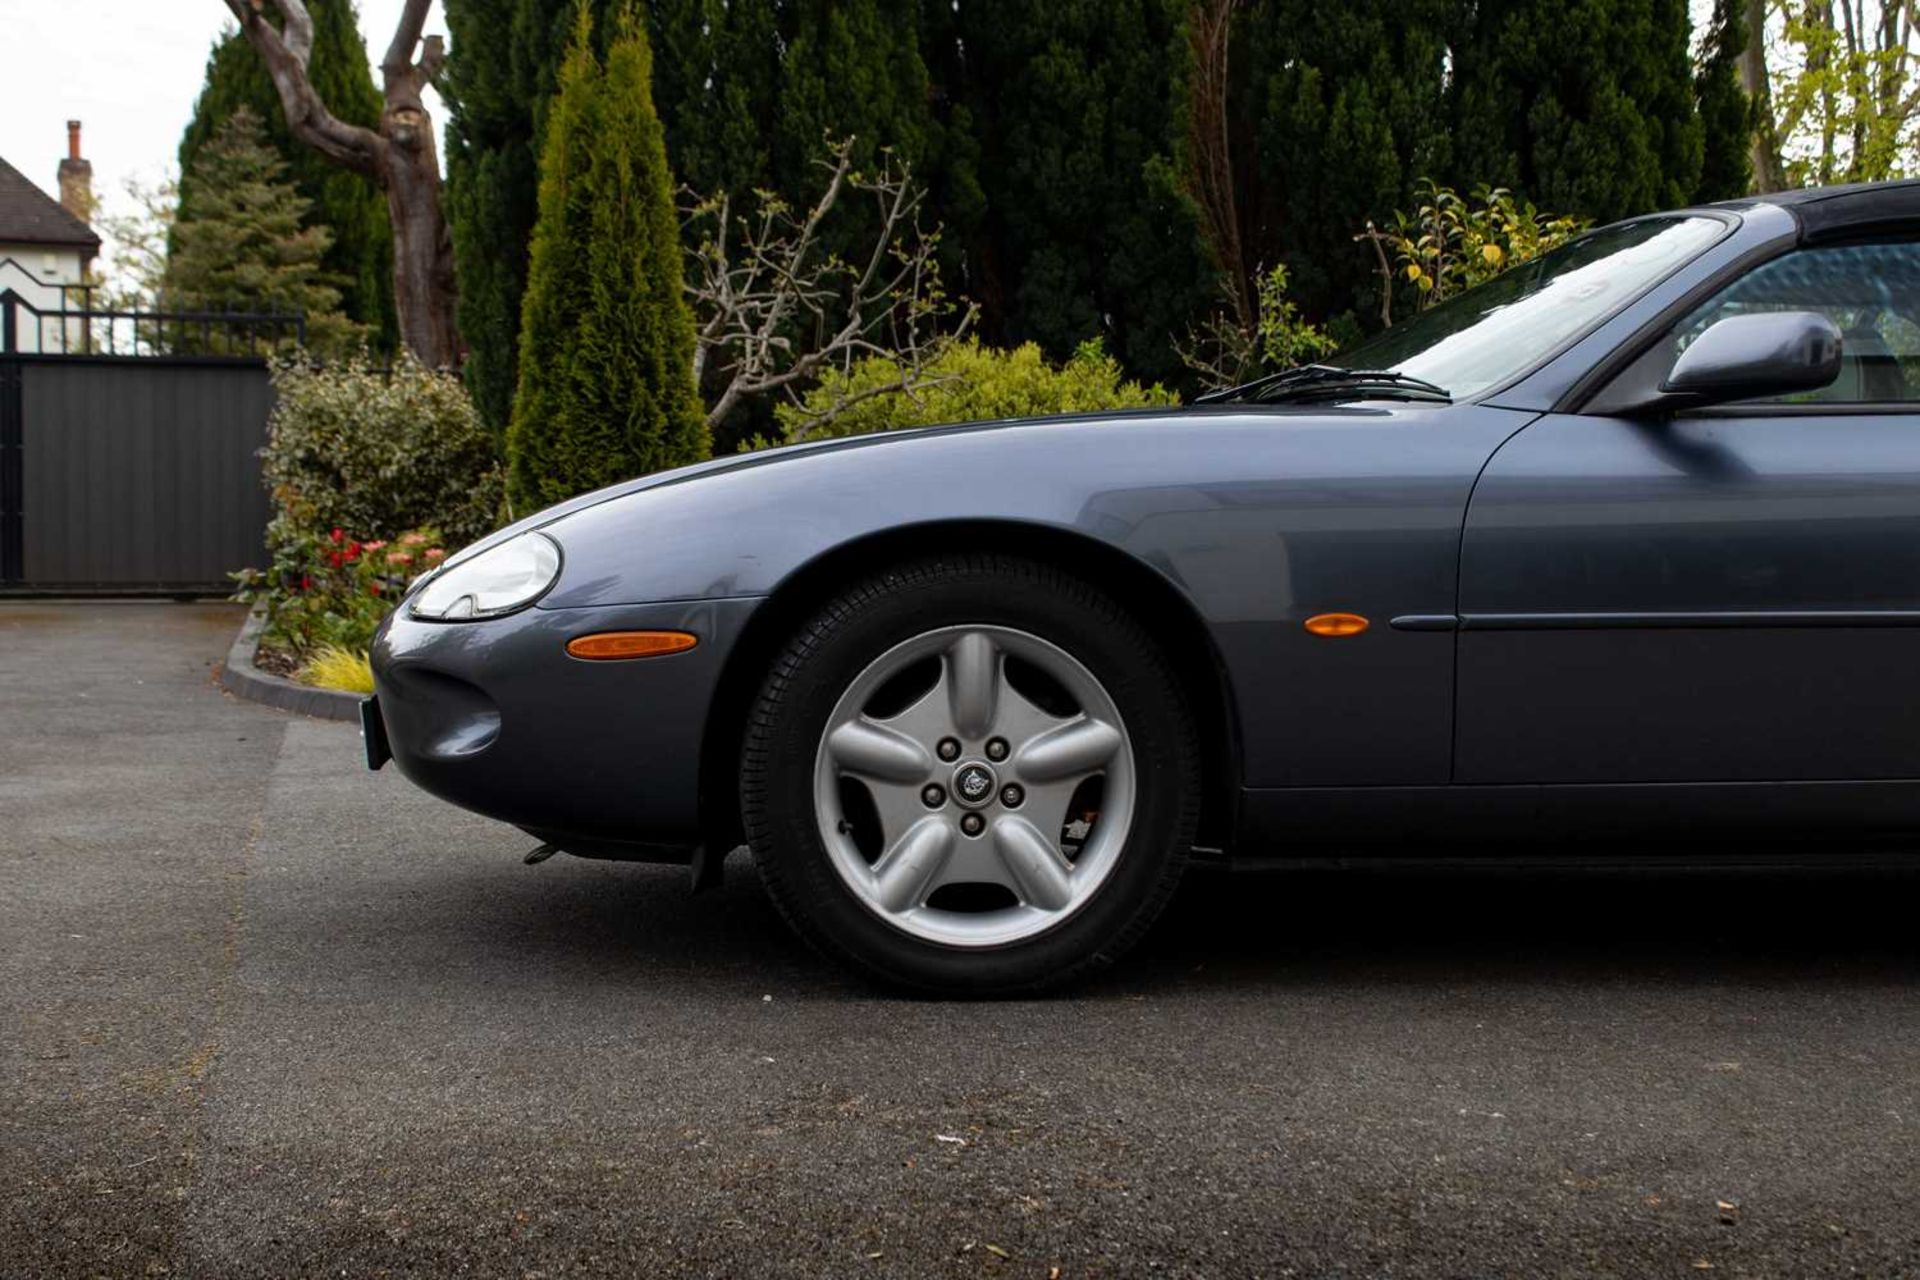 1997 Jaguar XK8 Convertible ***NO RESERVE*** Only one former keeper and full service history  - Image 24 of 89